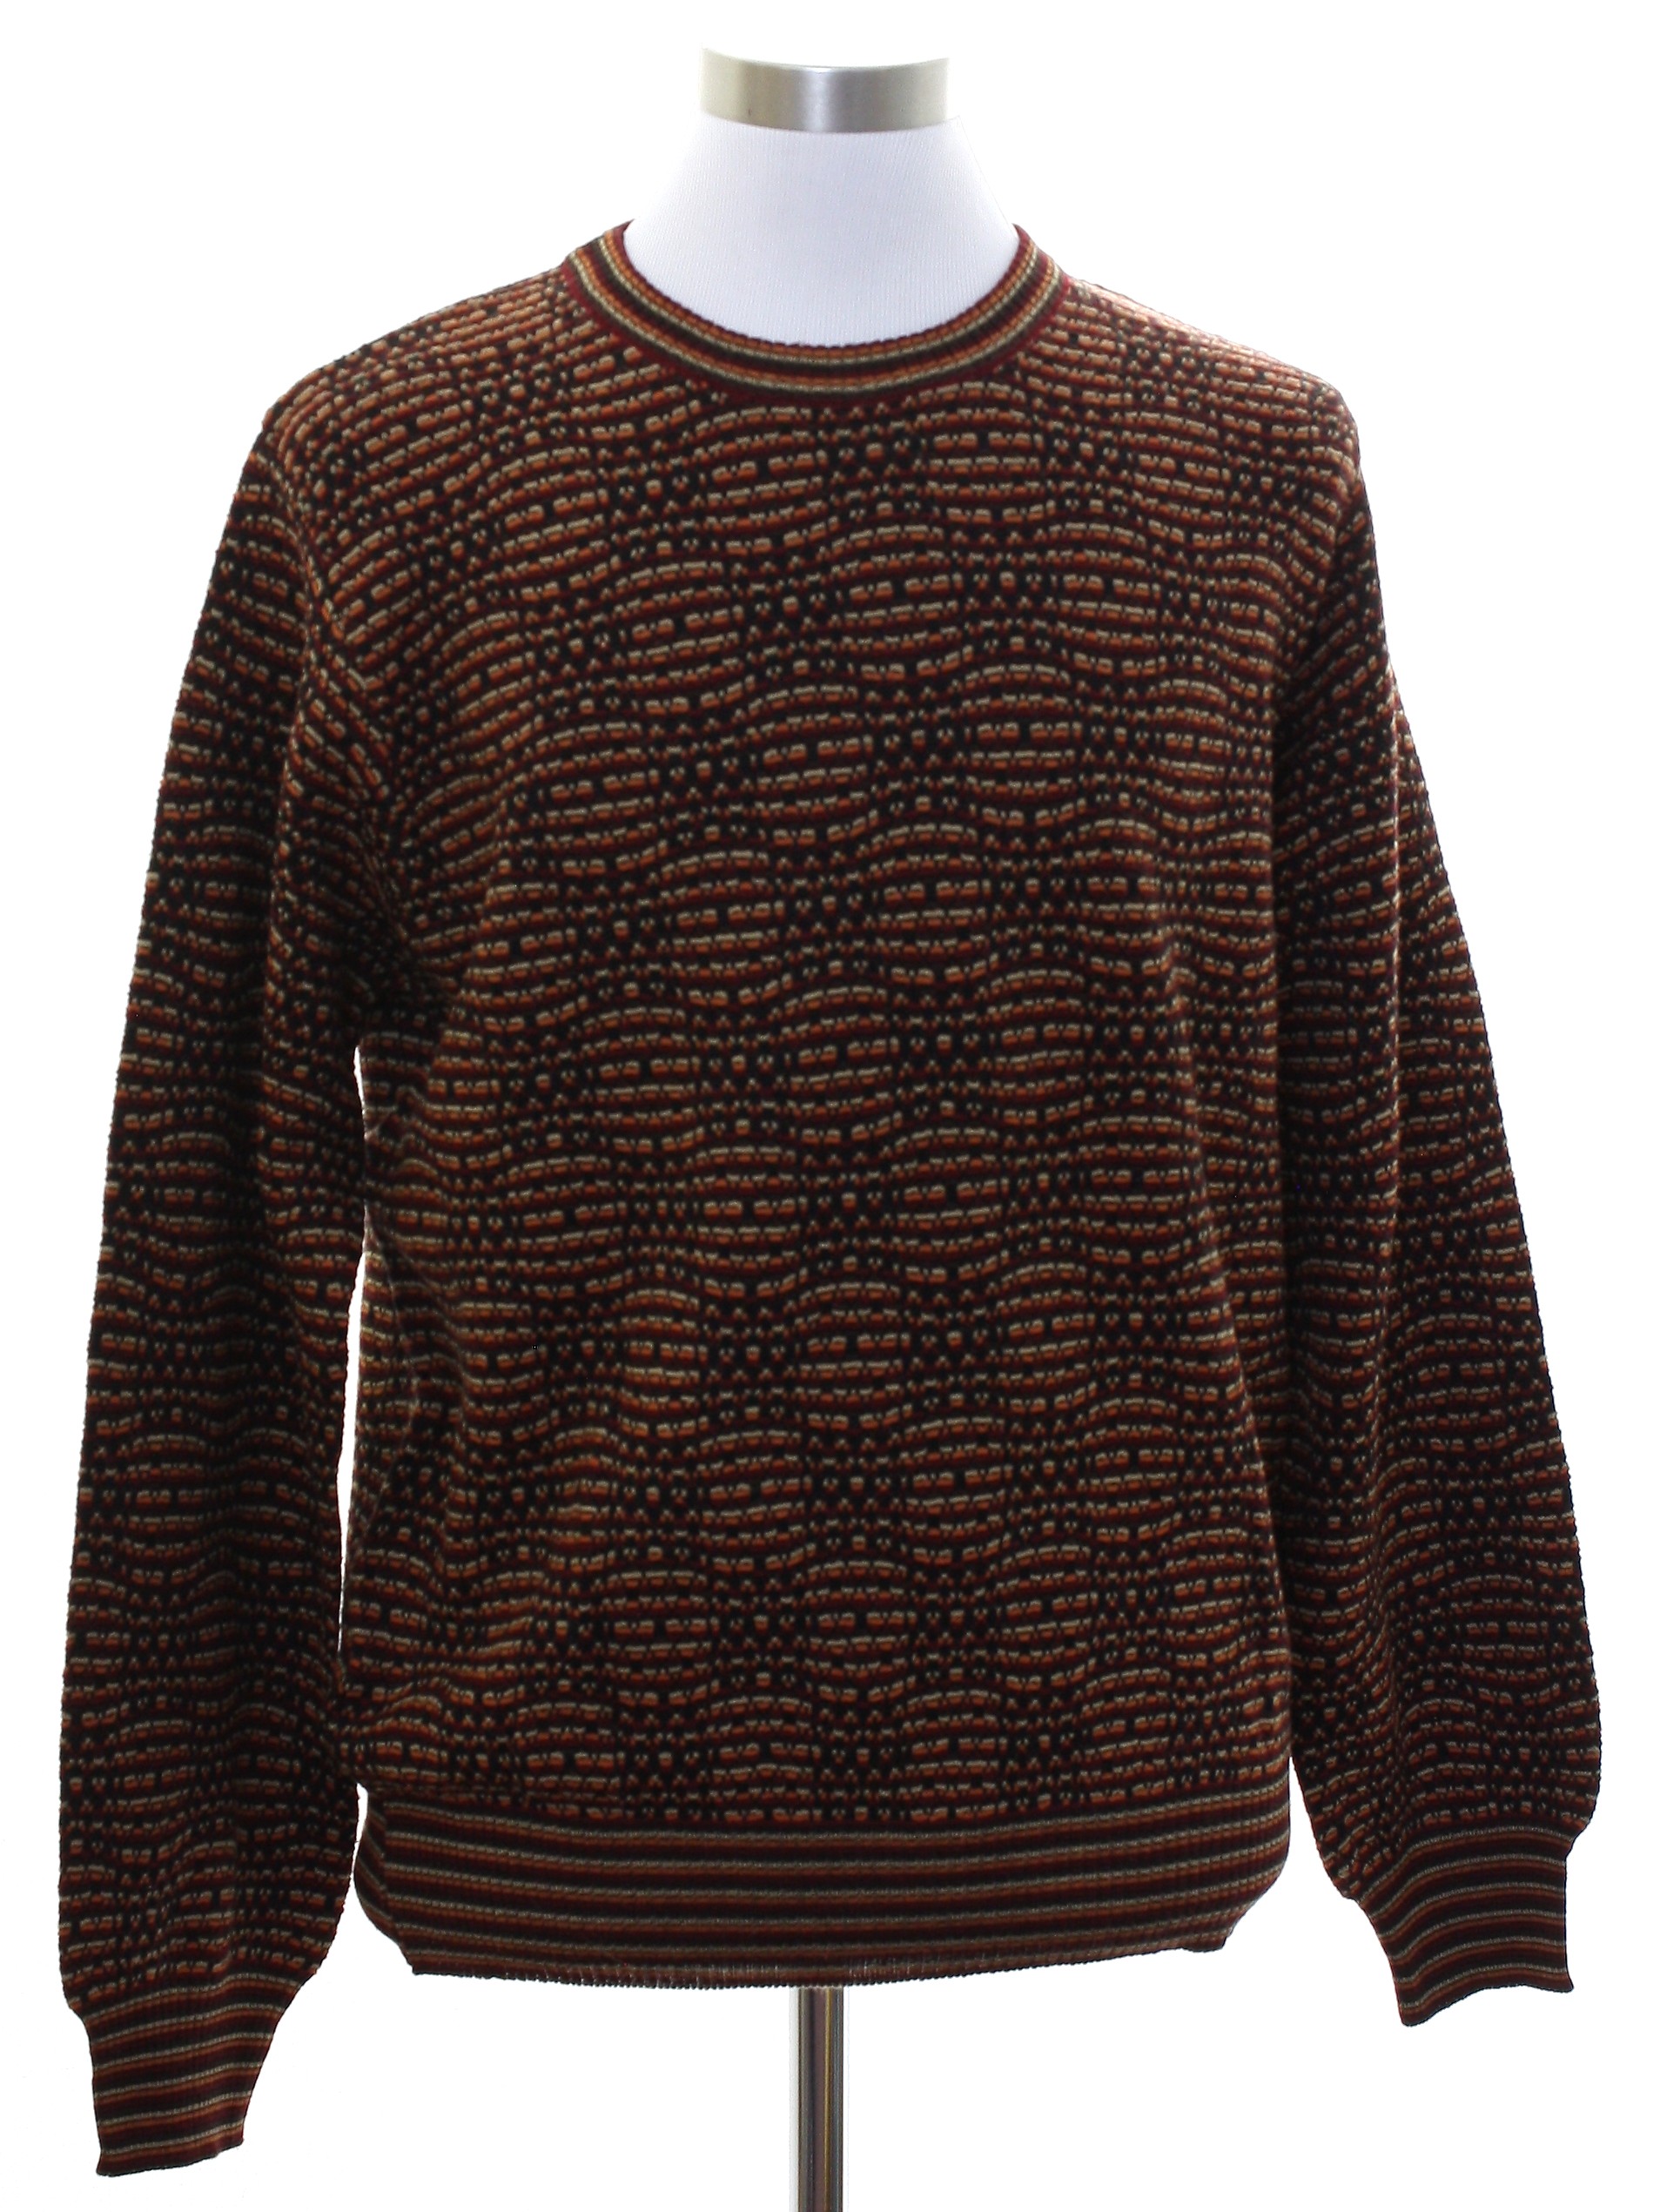 1990s Vintage Sweater: Early 90s -Travel Smith- Mens orange background ...